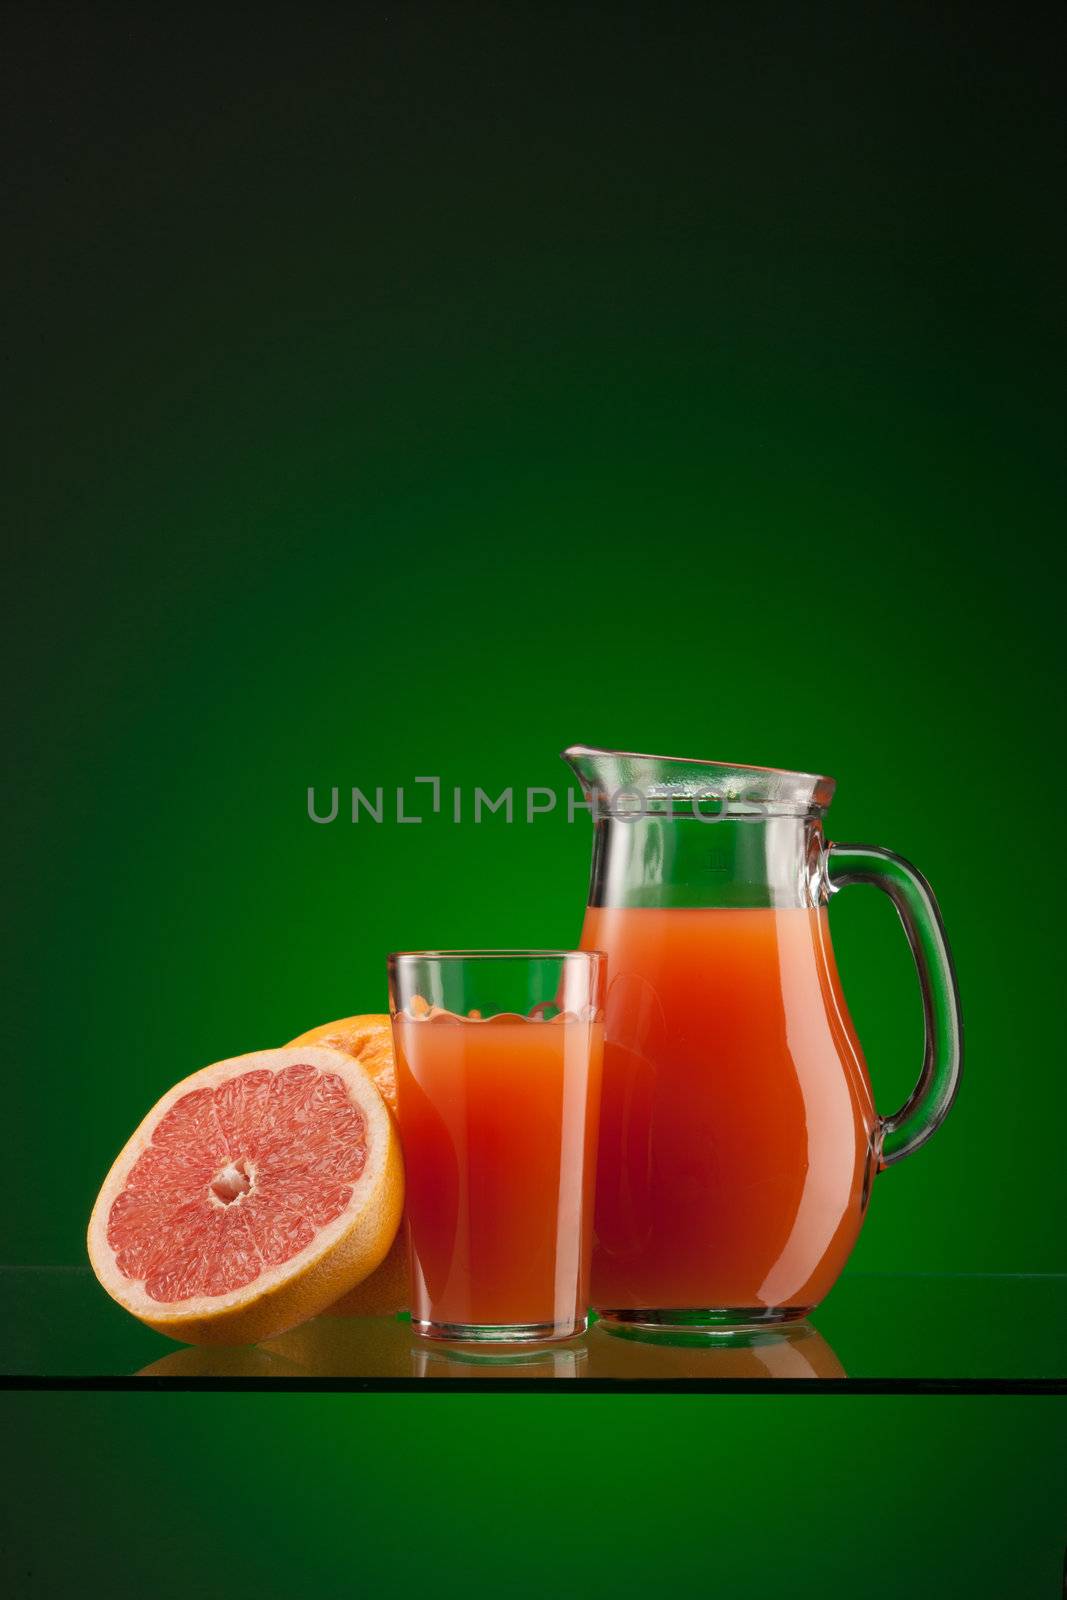 grapefruit juice by agg